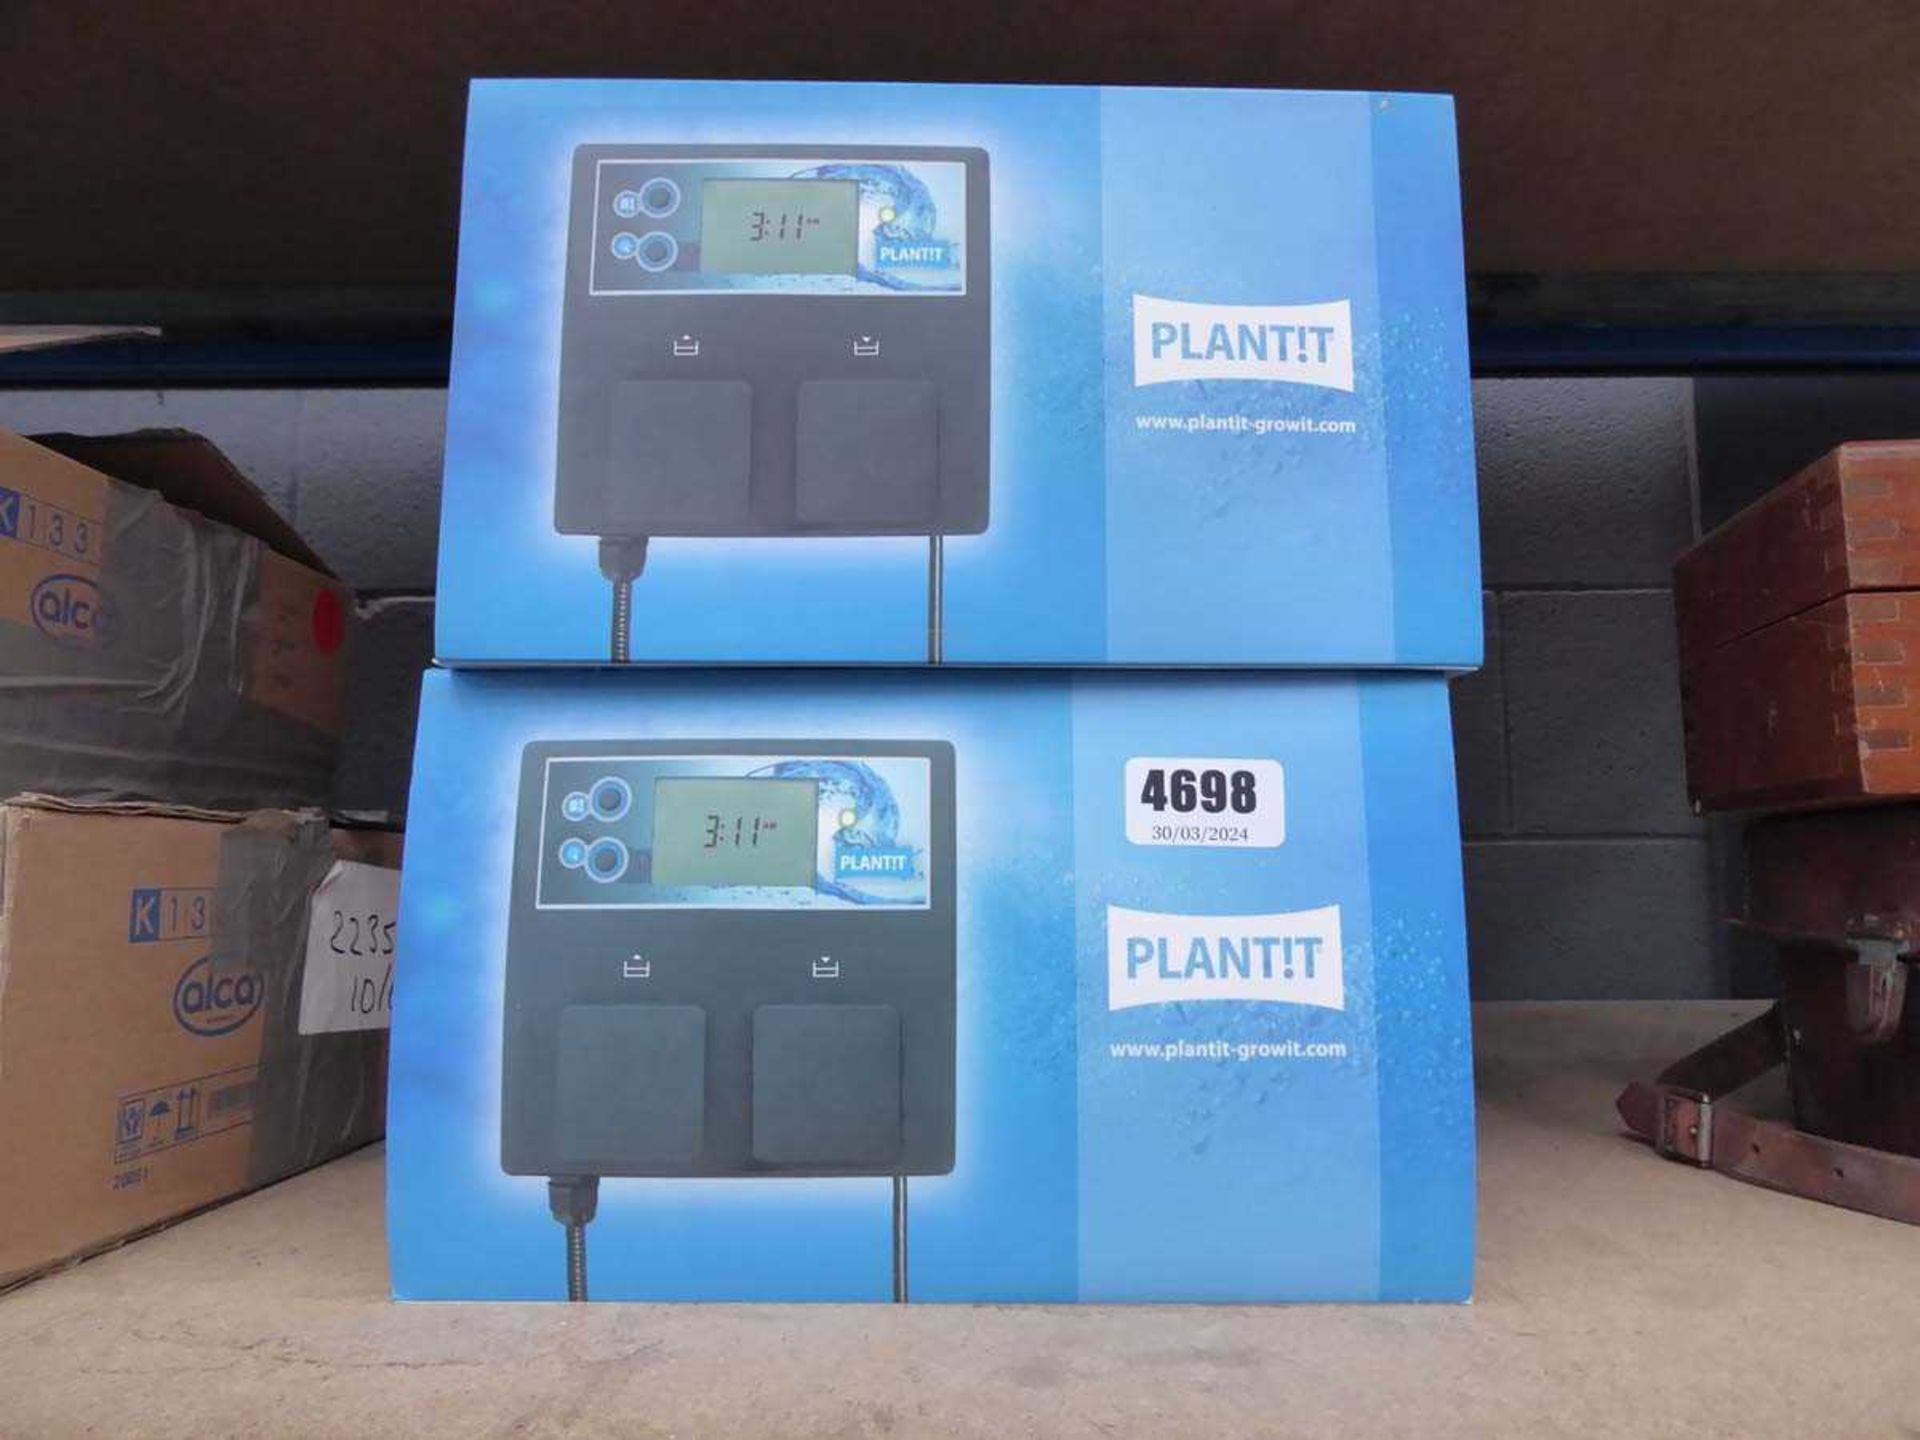 2 Plantit flood and drain controllers